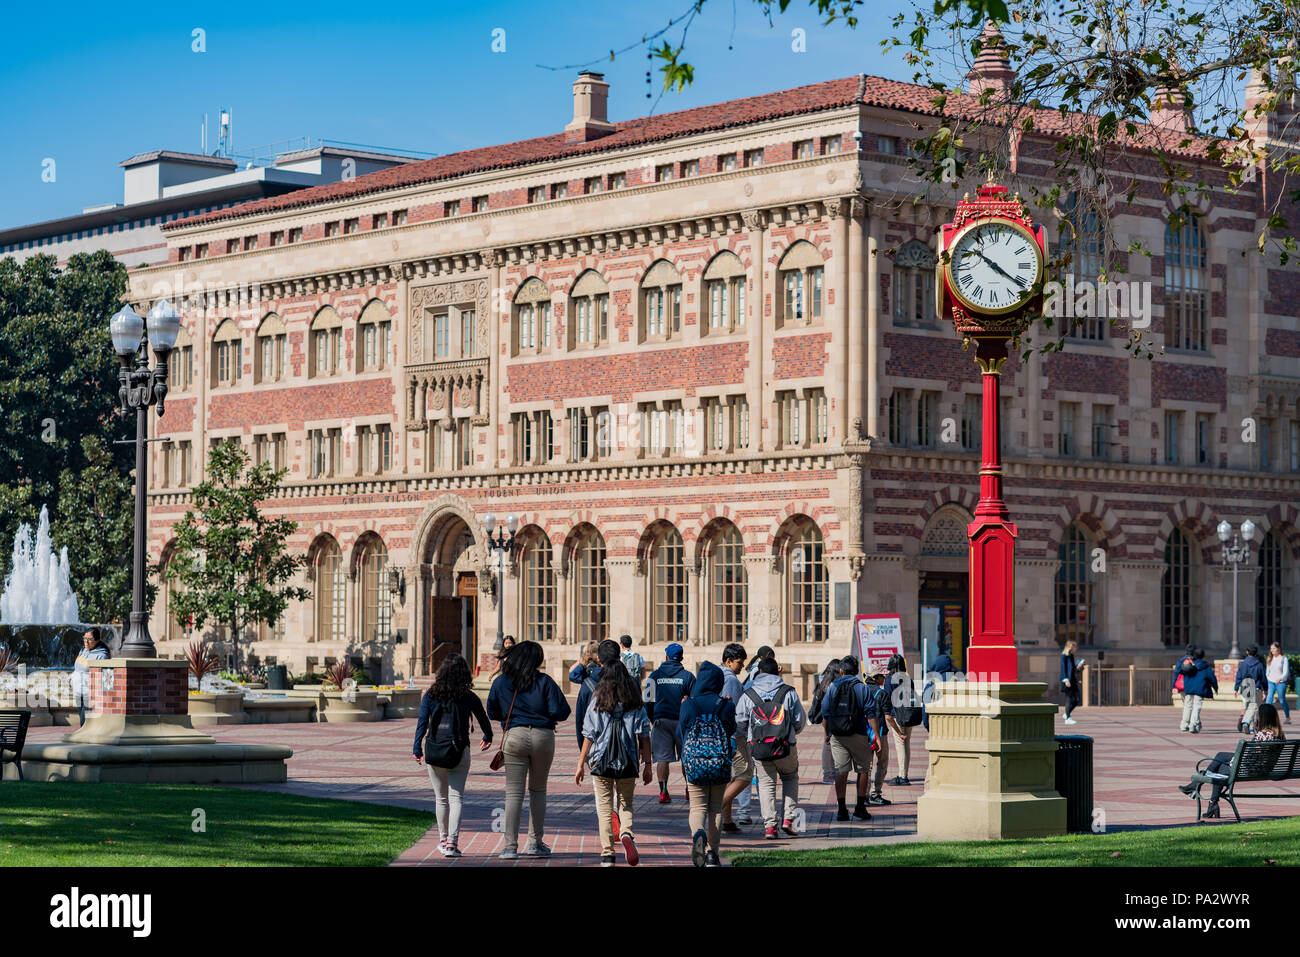 Los Angeles, MAR 29: Exterior view of the USC Career Center on MAR 29, 2018 at Los Angeles, California Stock Photo